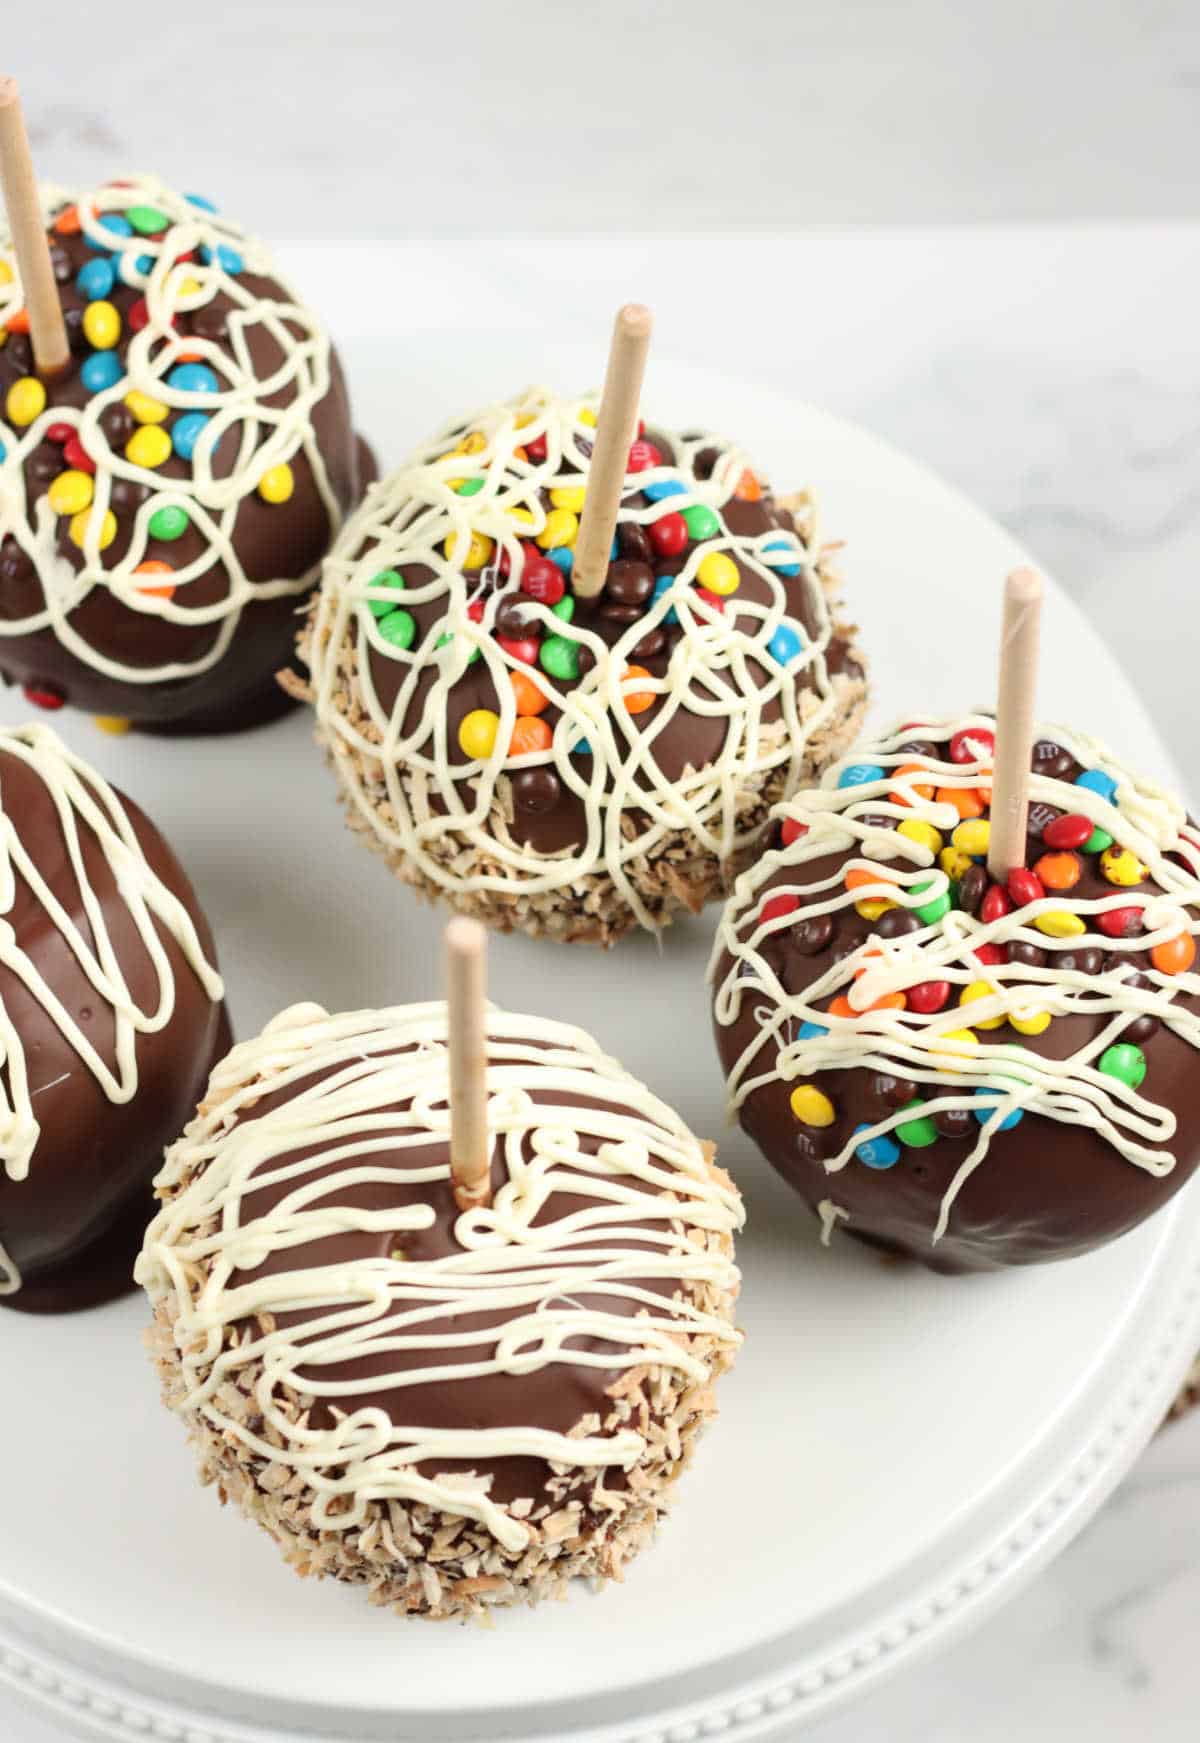 Caramel and chocolate dipped apples with toppings on white footed cake dish.